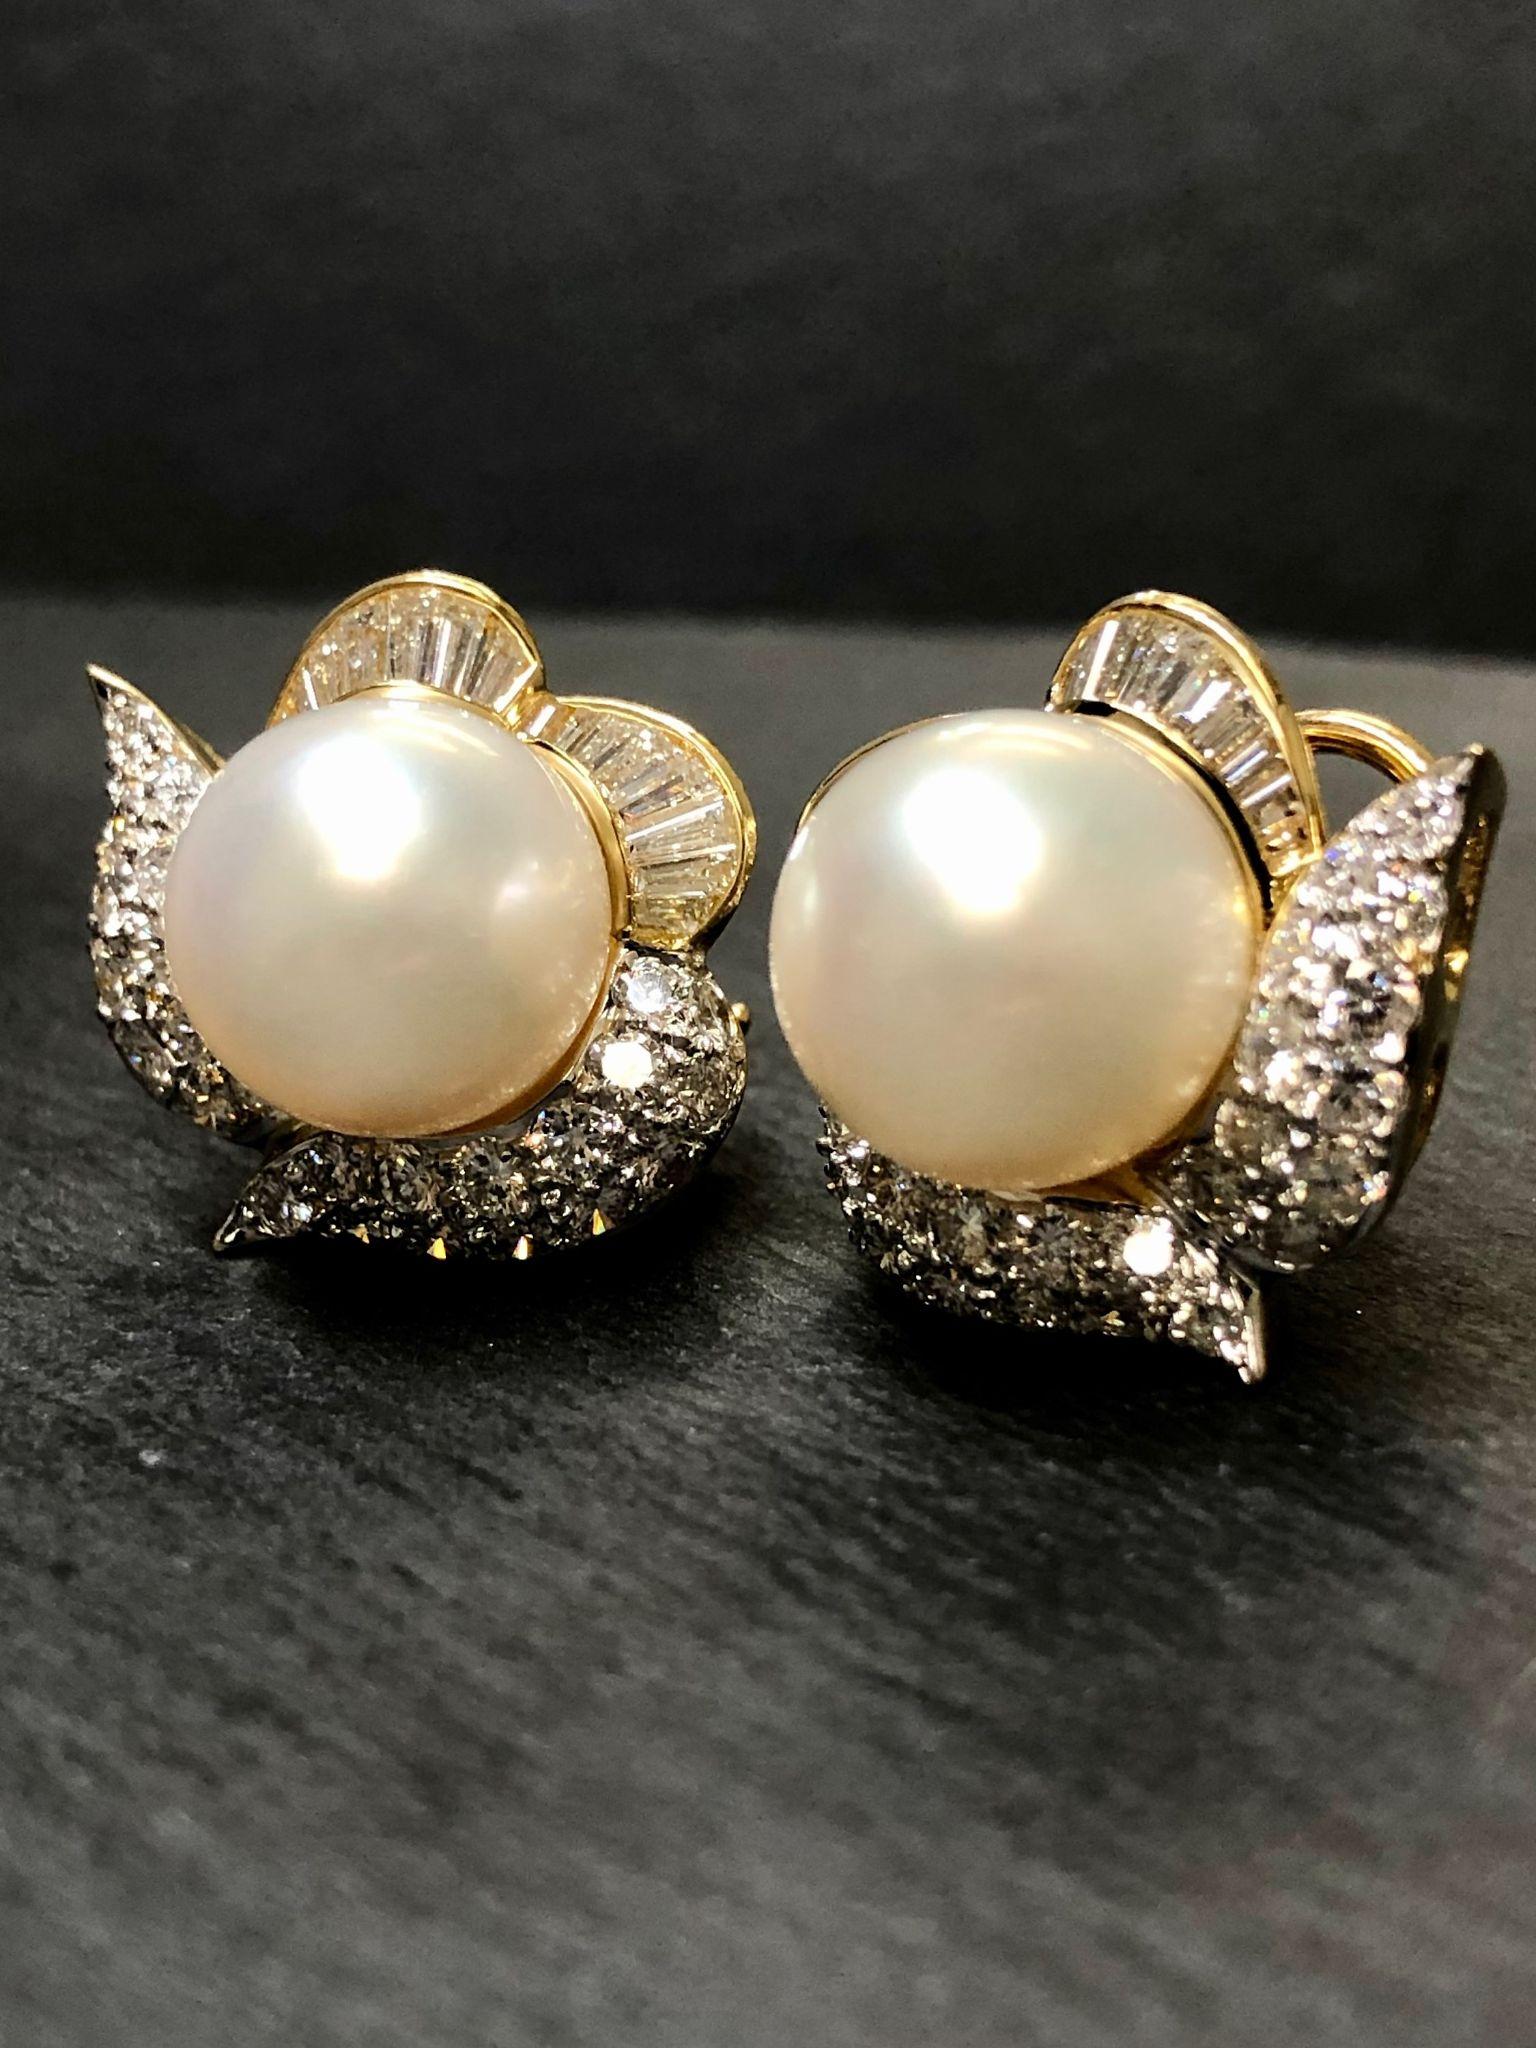 A classically elegant pair of earrings done in 18K and centered by two, 12.50mm South Sea pearls surrounded by approximately 4cttw in G-H Vs clarity round and baguette diamonds.

Dimensions/Weight
3/4” in diameter. Weighs